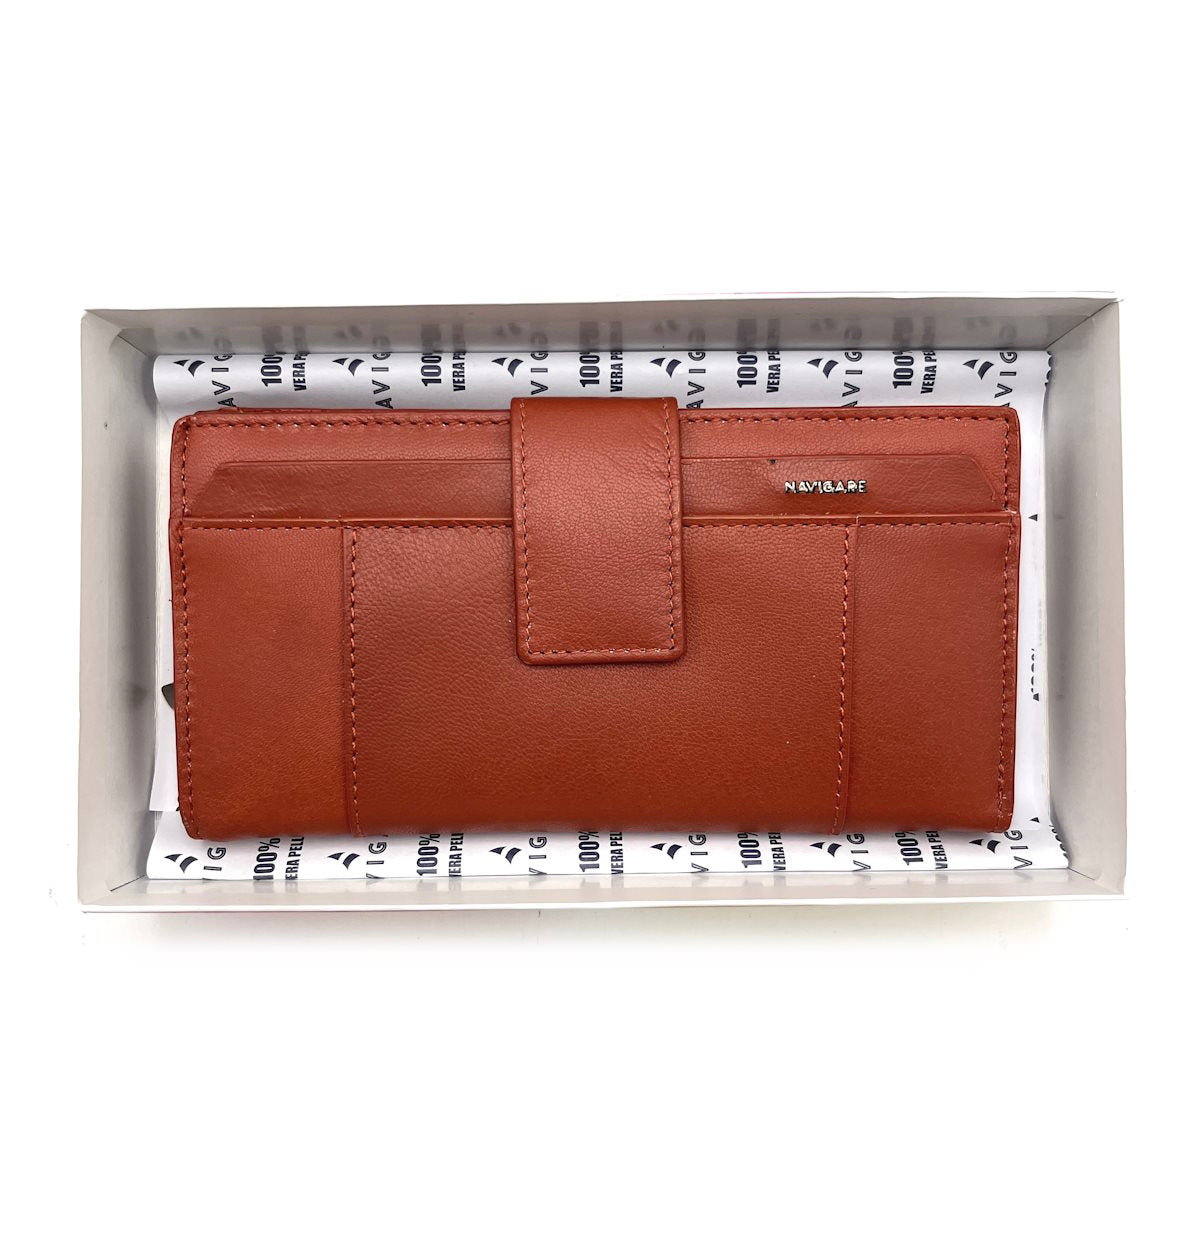 Genuine leather wallet, Navigare for women, art. PF791-61